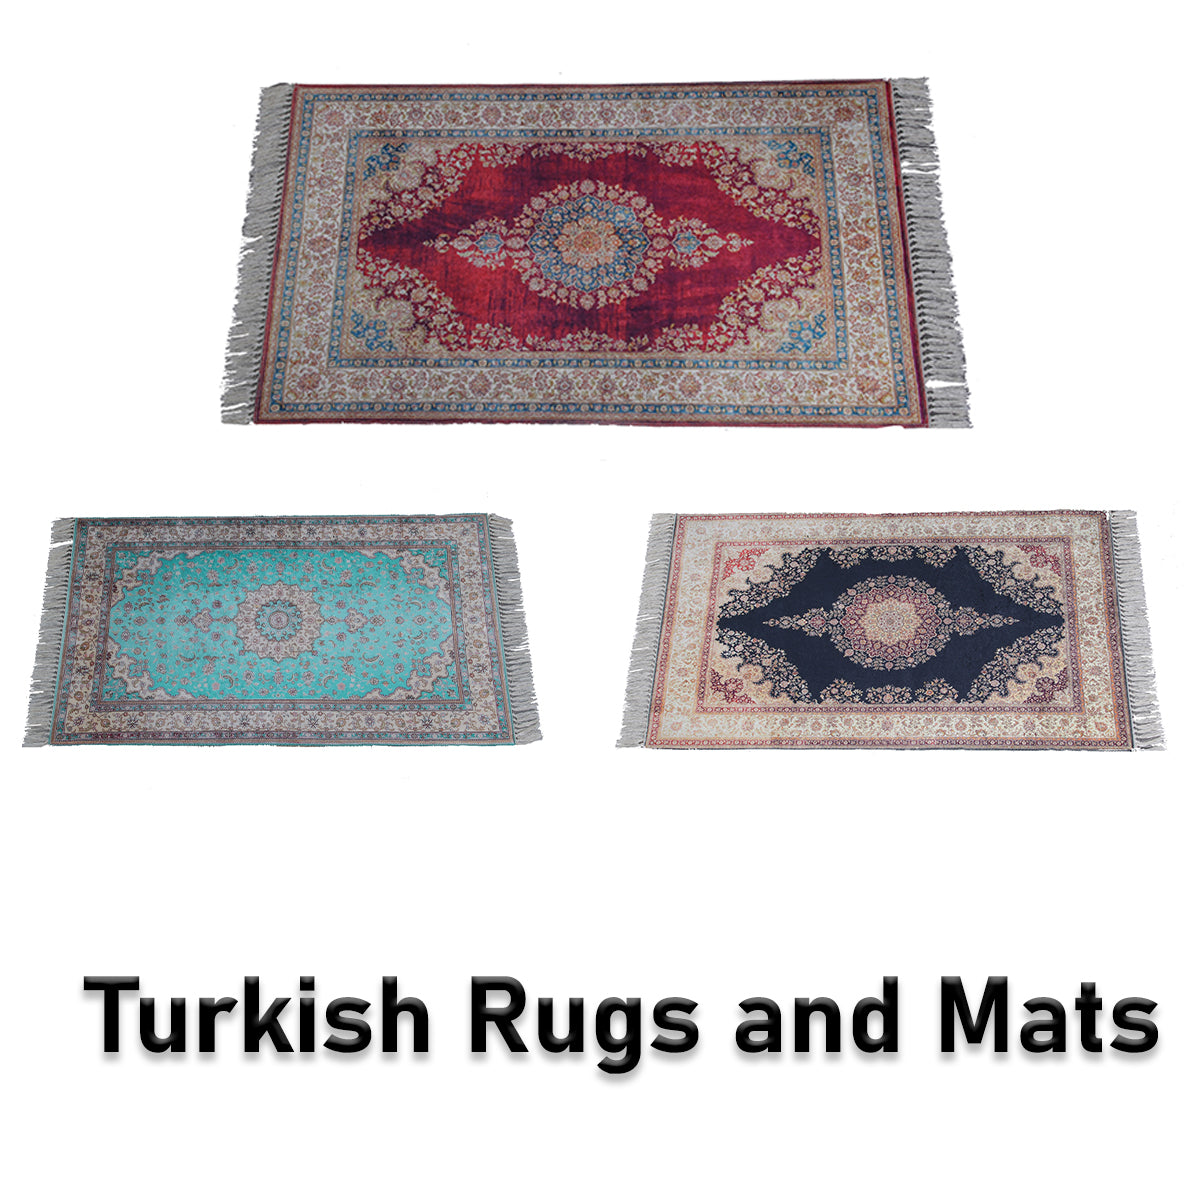 Turkish Rugs and Mats